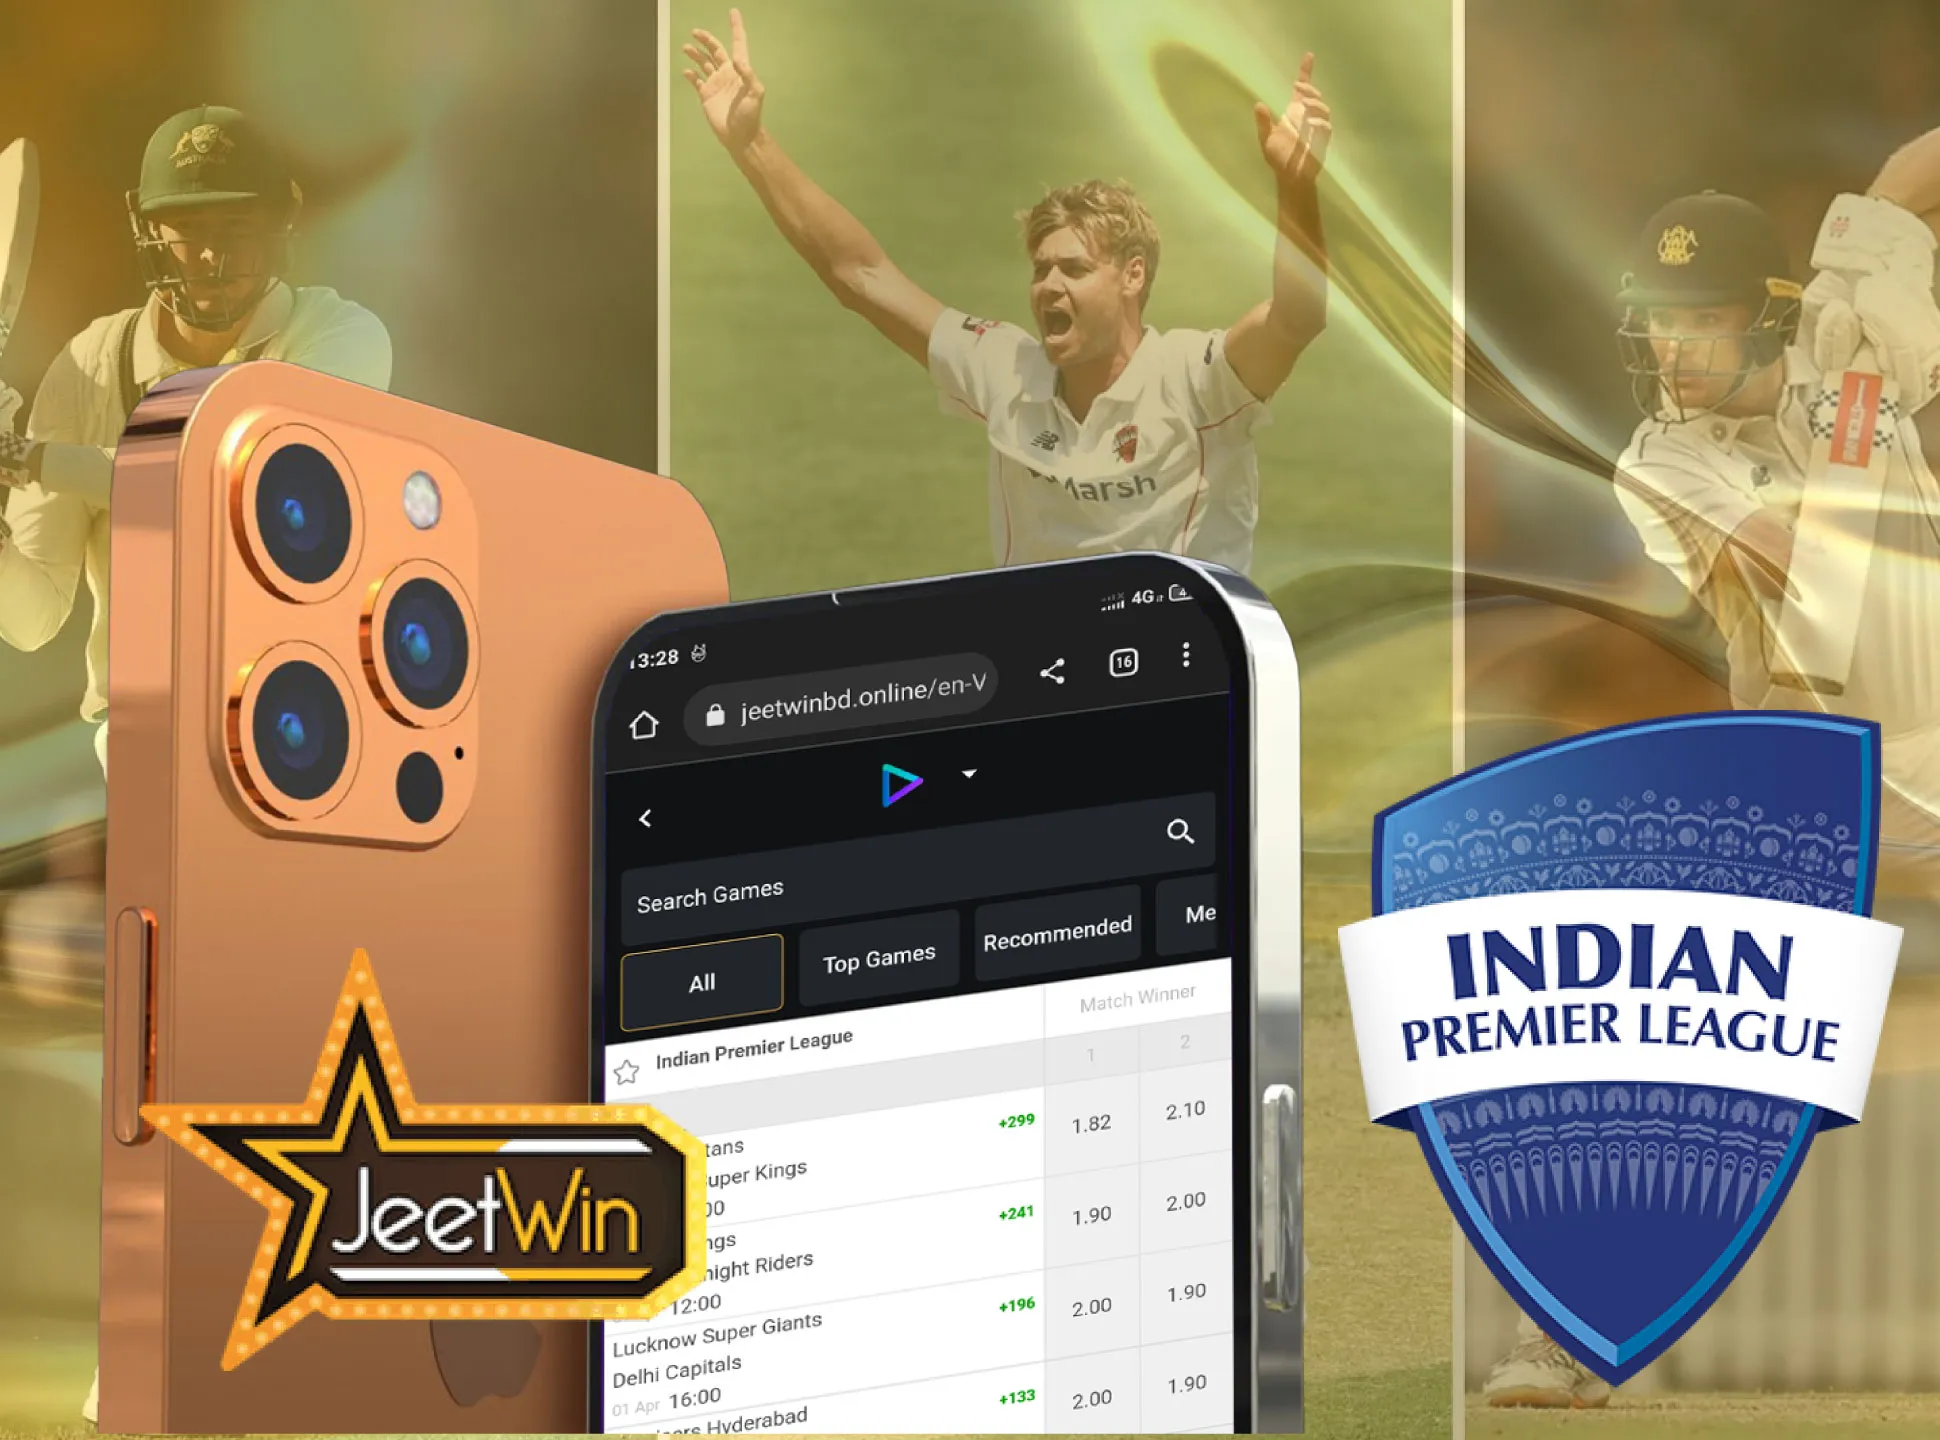 If you want to place bets on IPL on go you should download the Jeetwin mobile app.